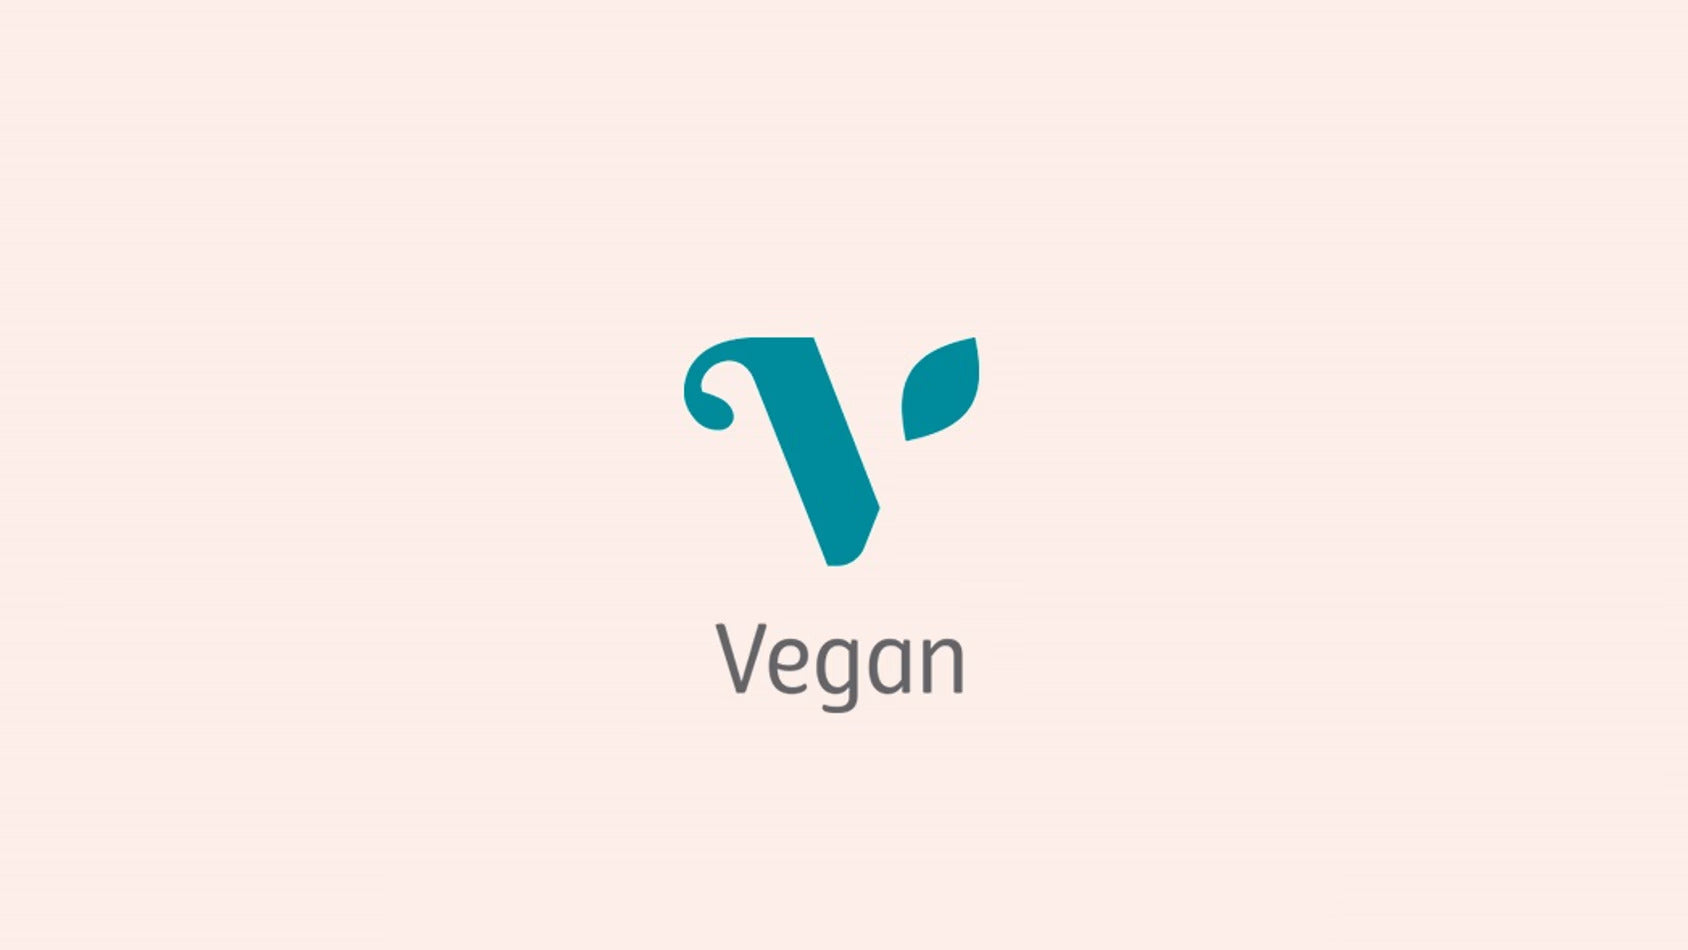 About our vegan products